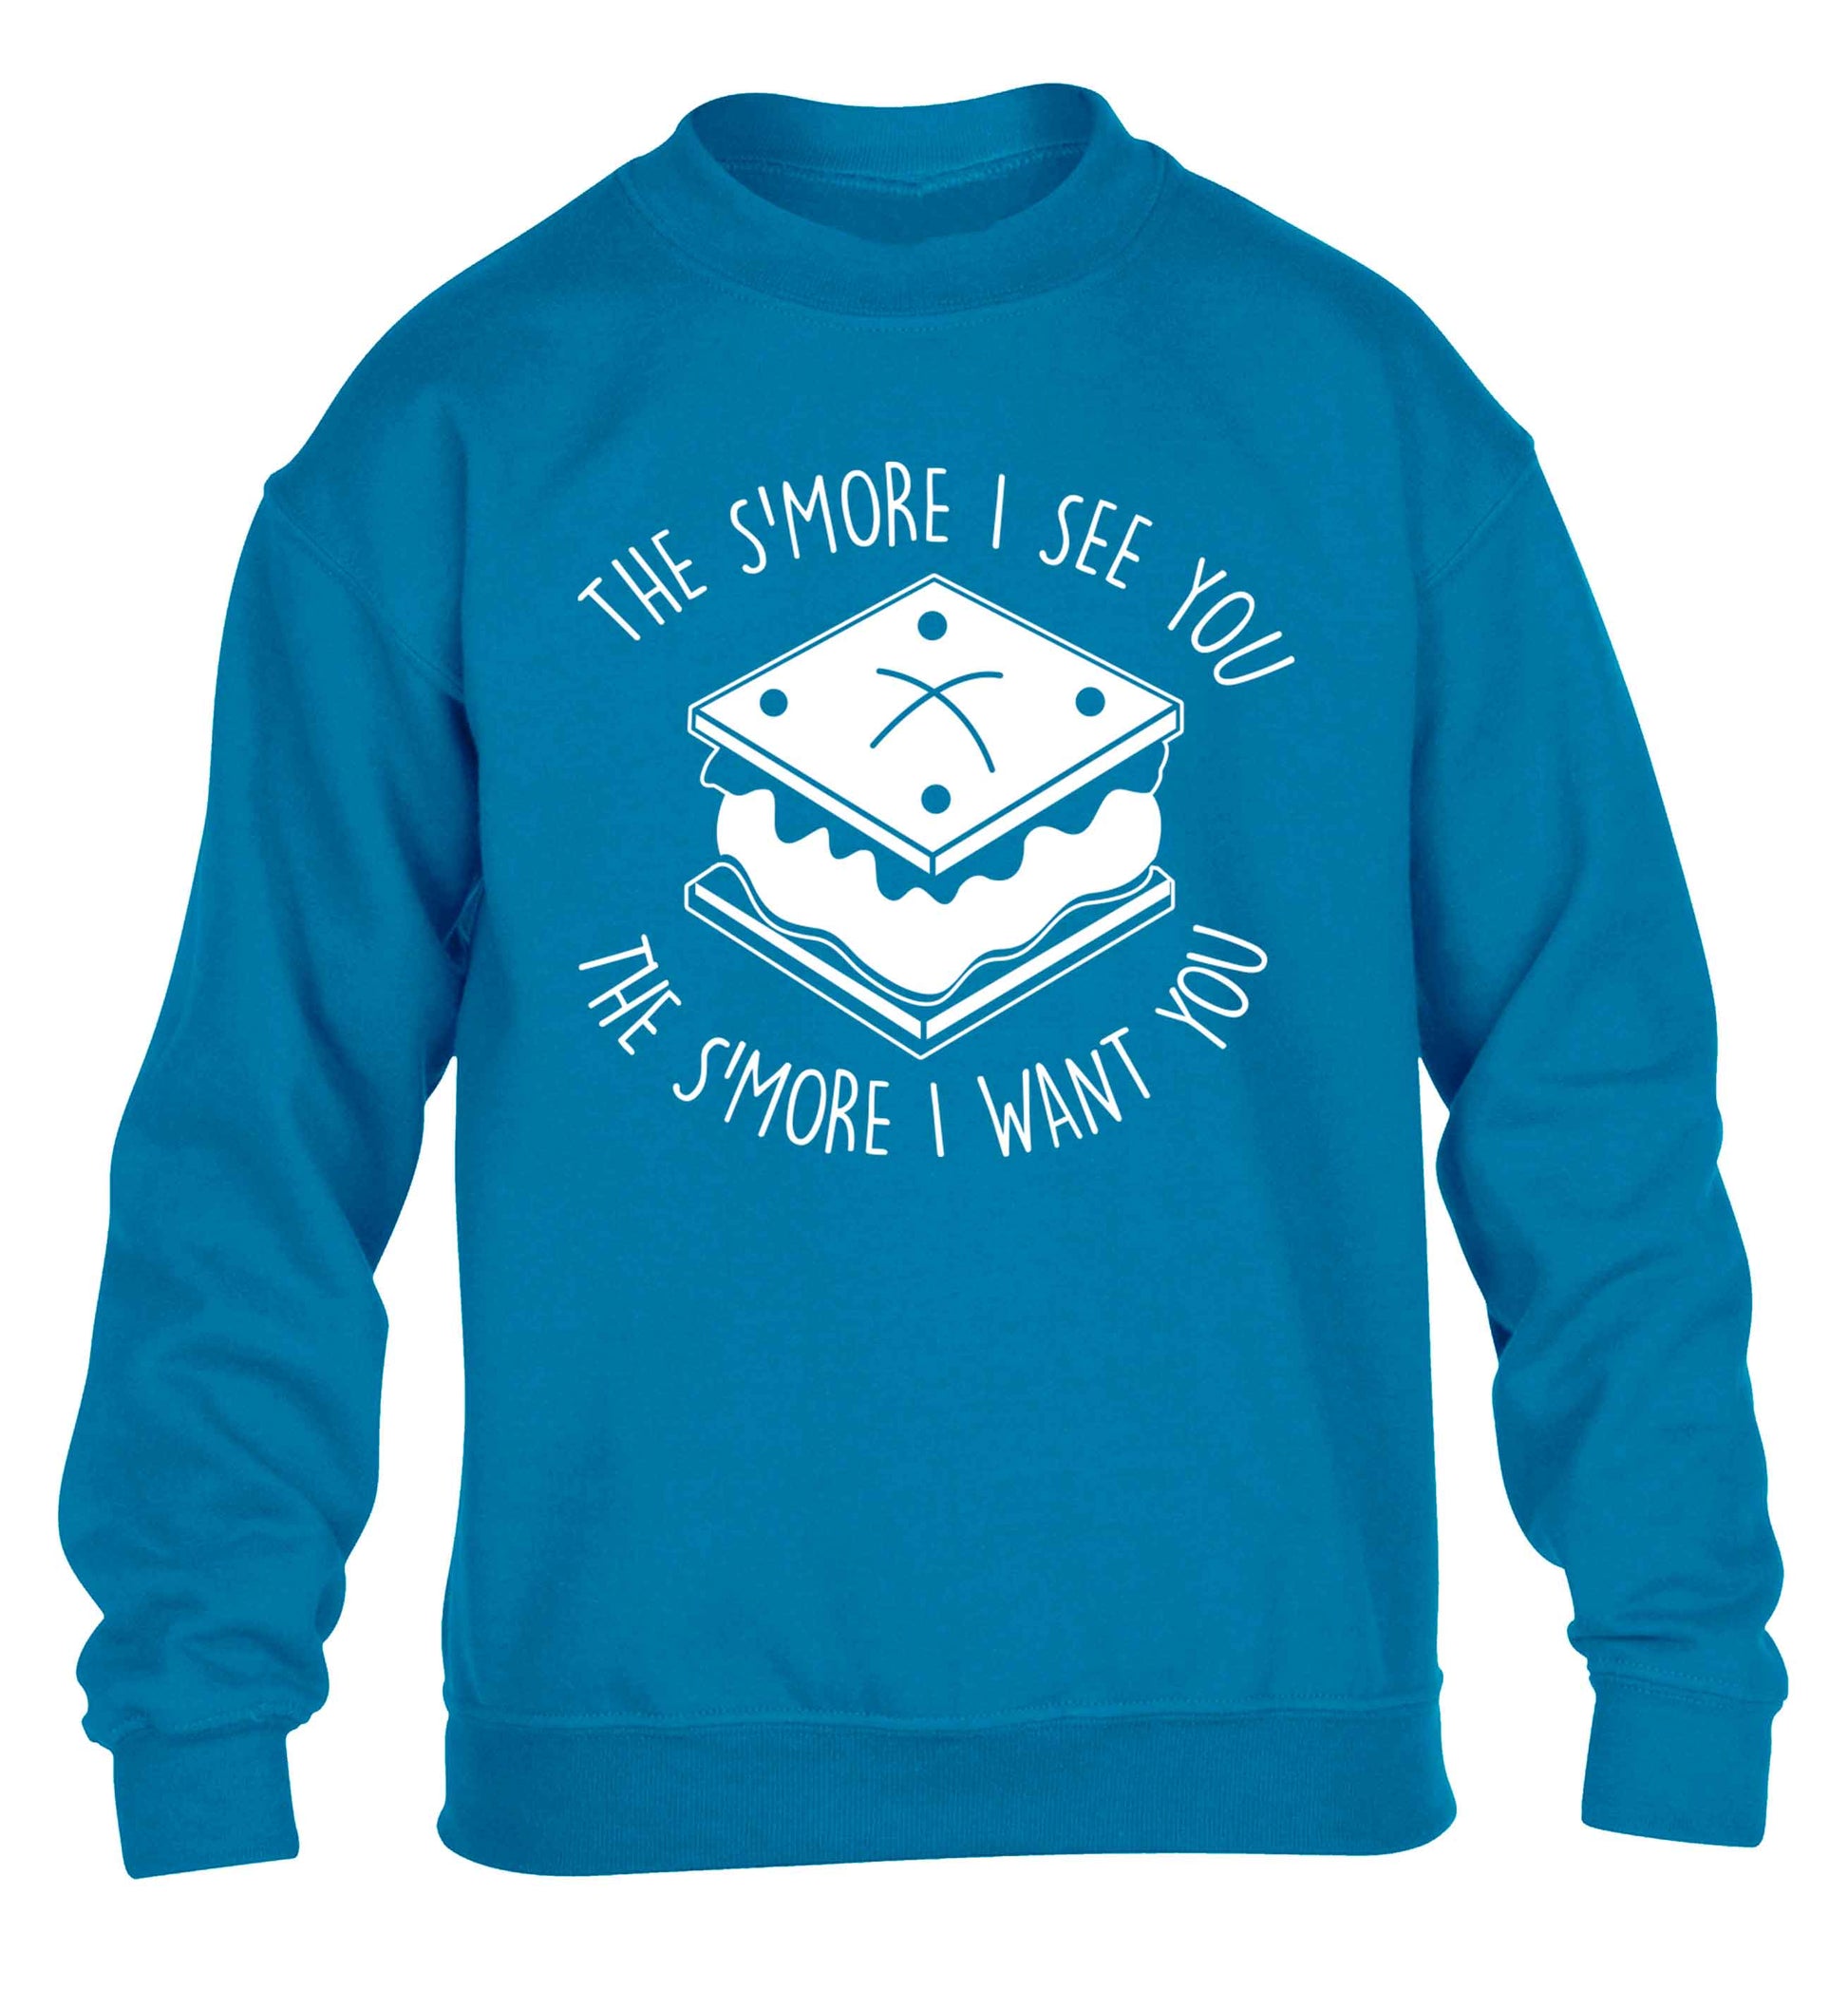 The s'more I see you the s'more I want you children's blue sweater 12-13 Years